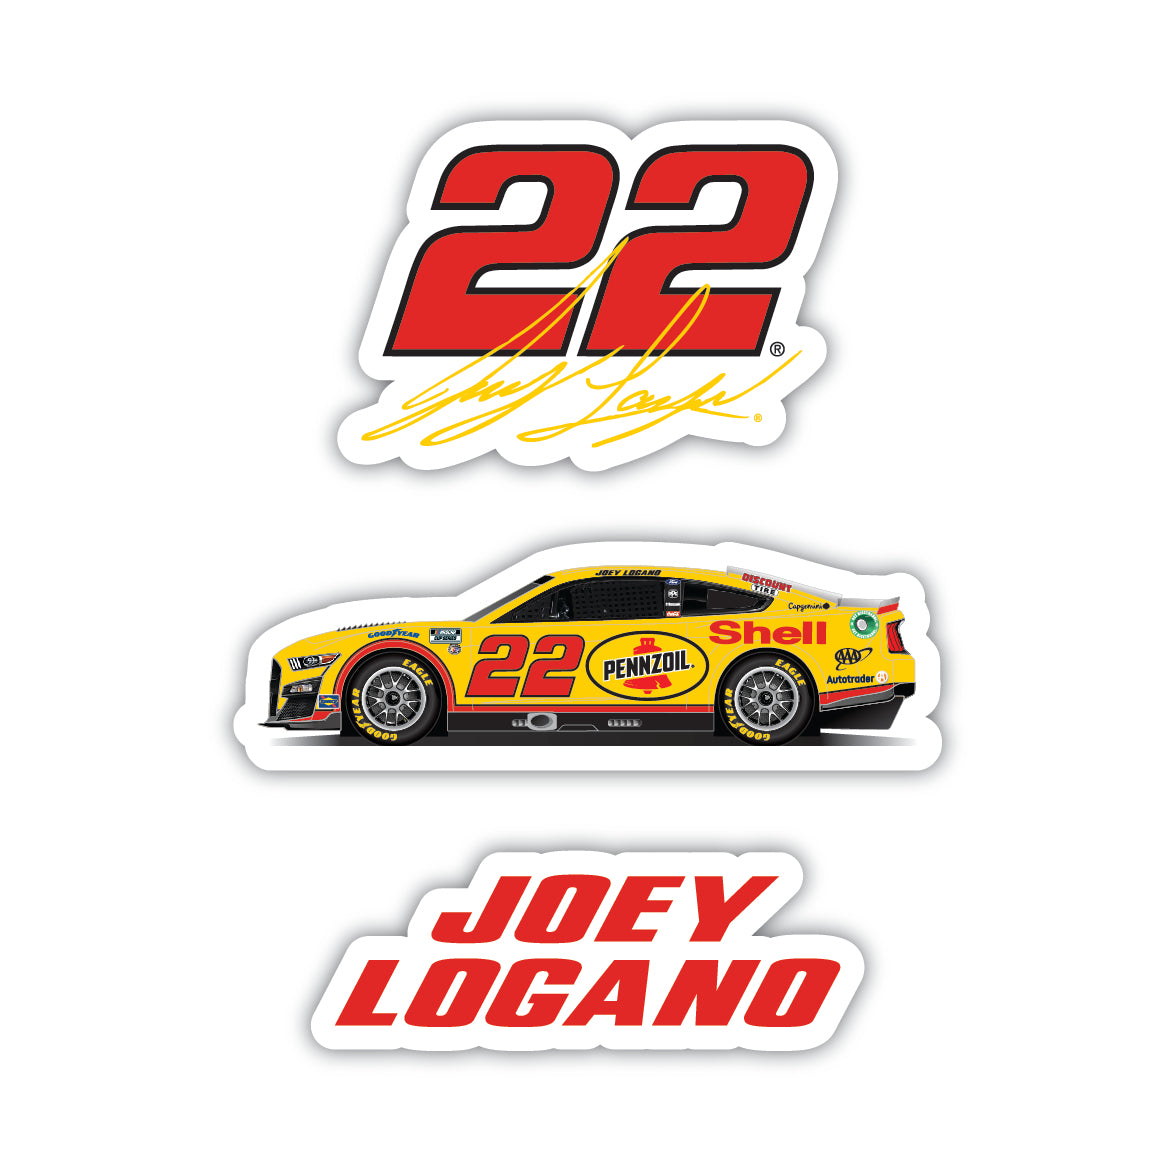 #22 Joey Logano 3 Pack Laser Cut Decal